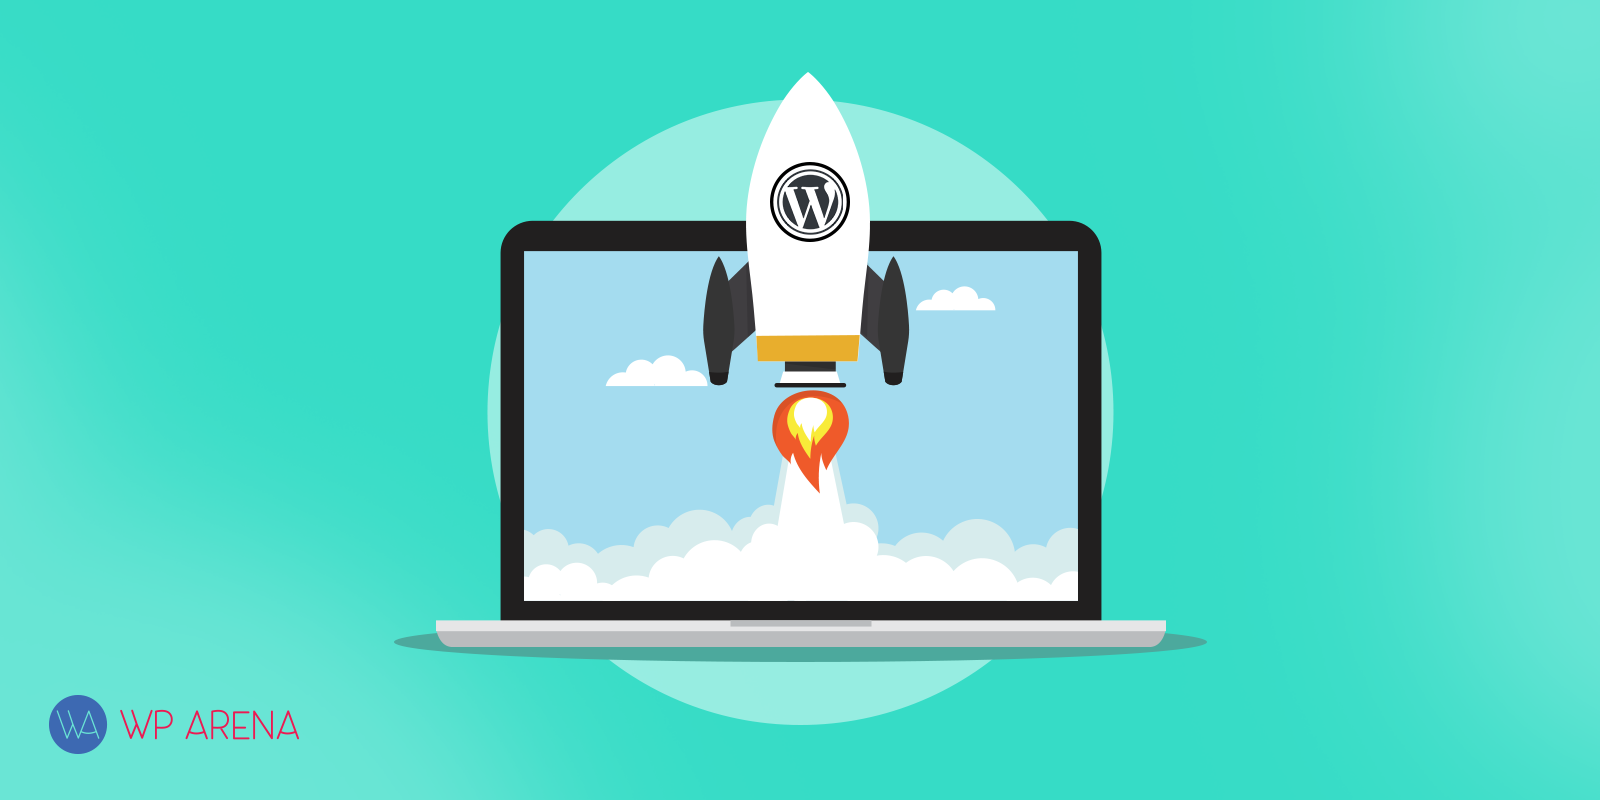 optimize your WordPress performance and traffic